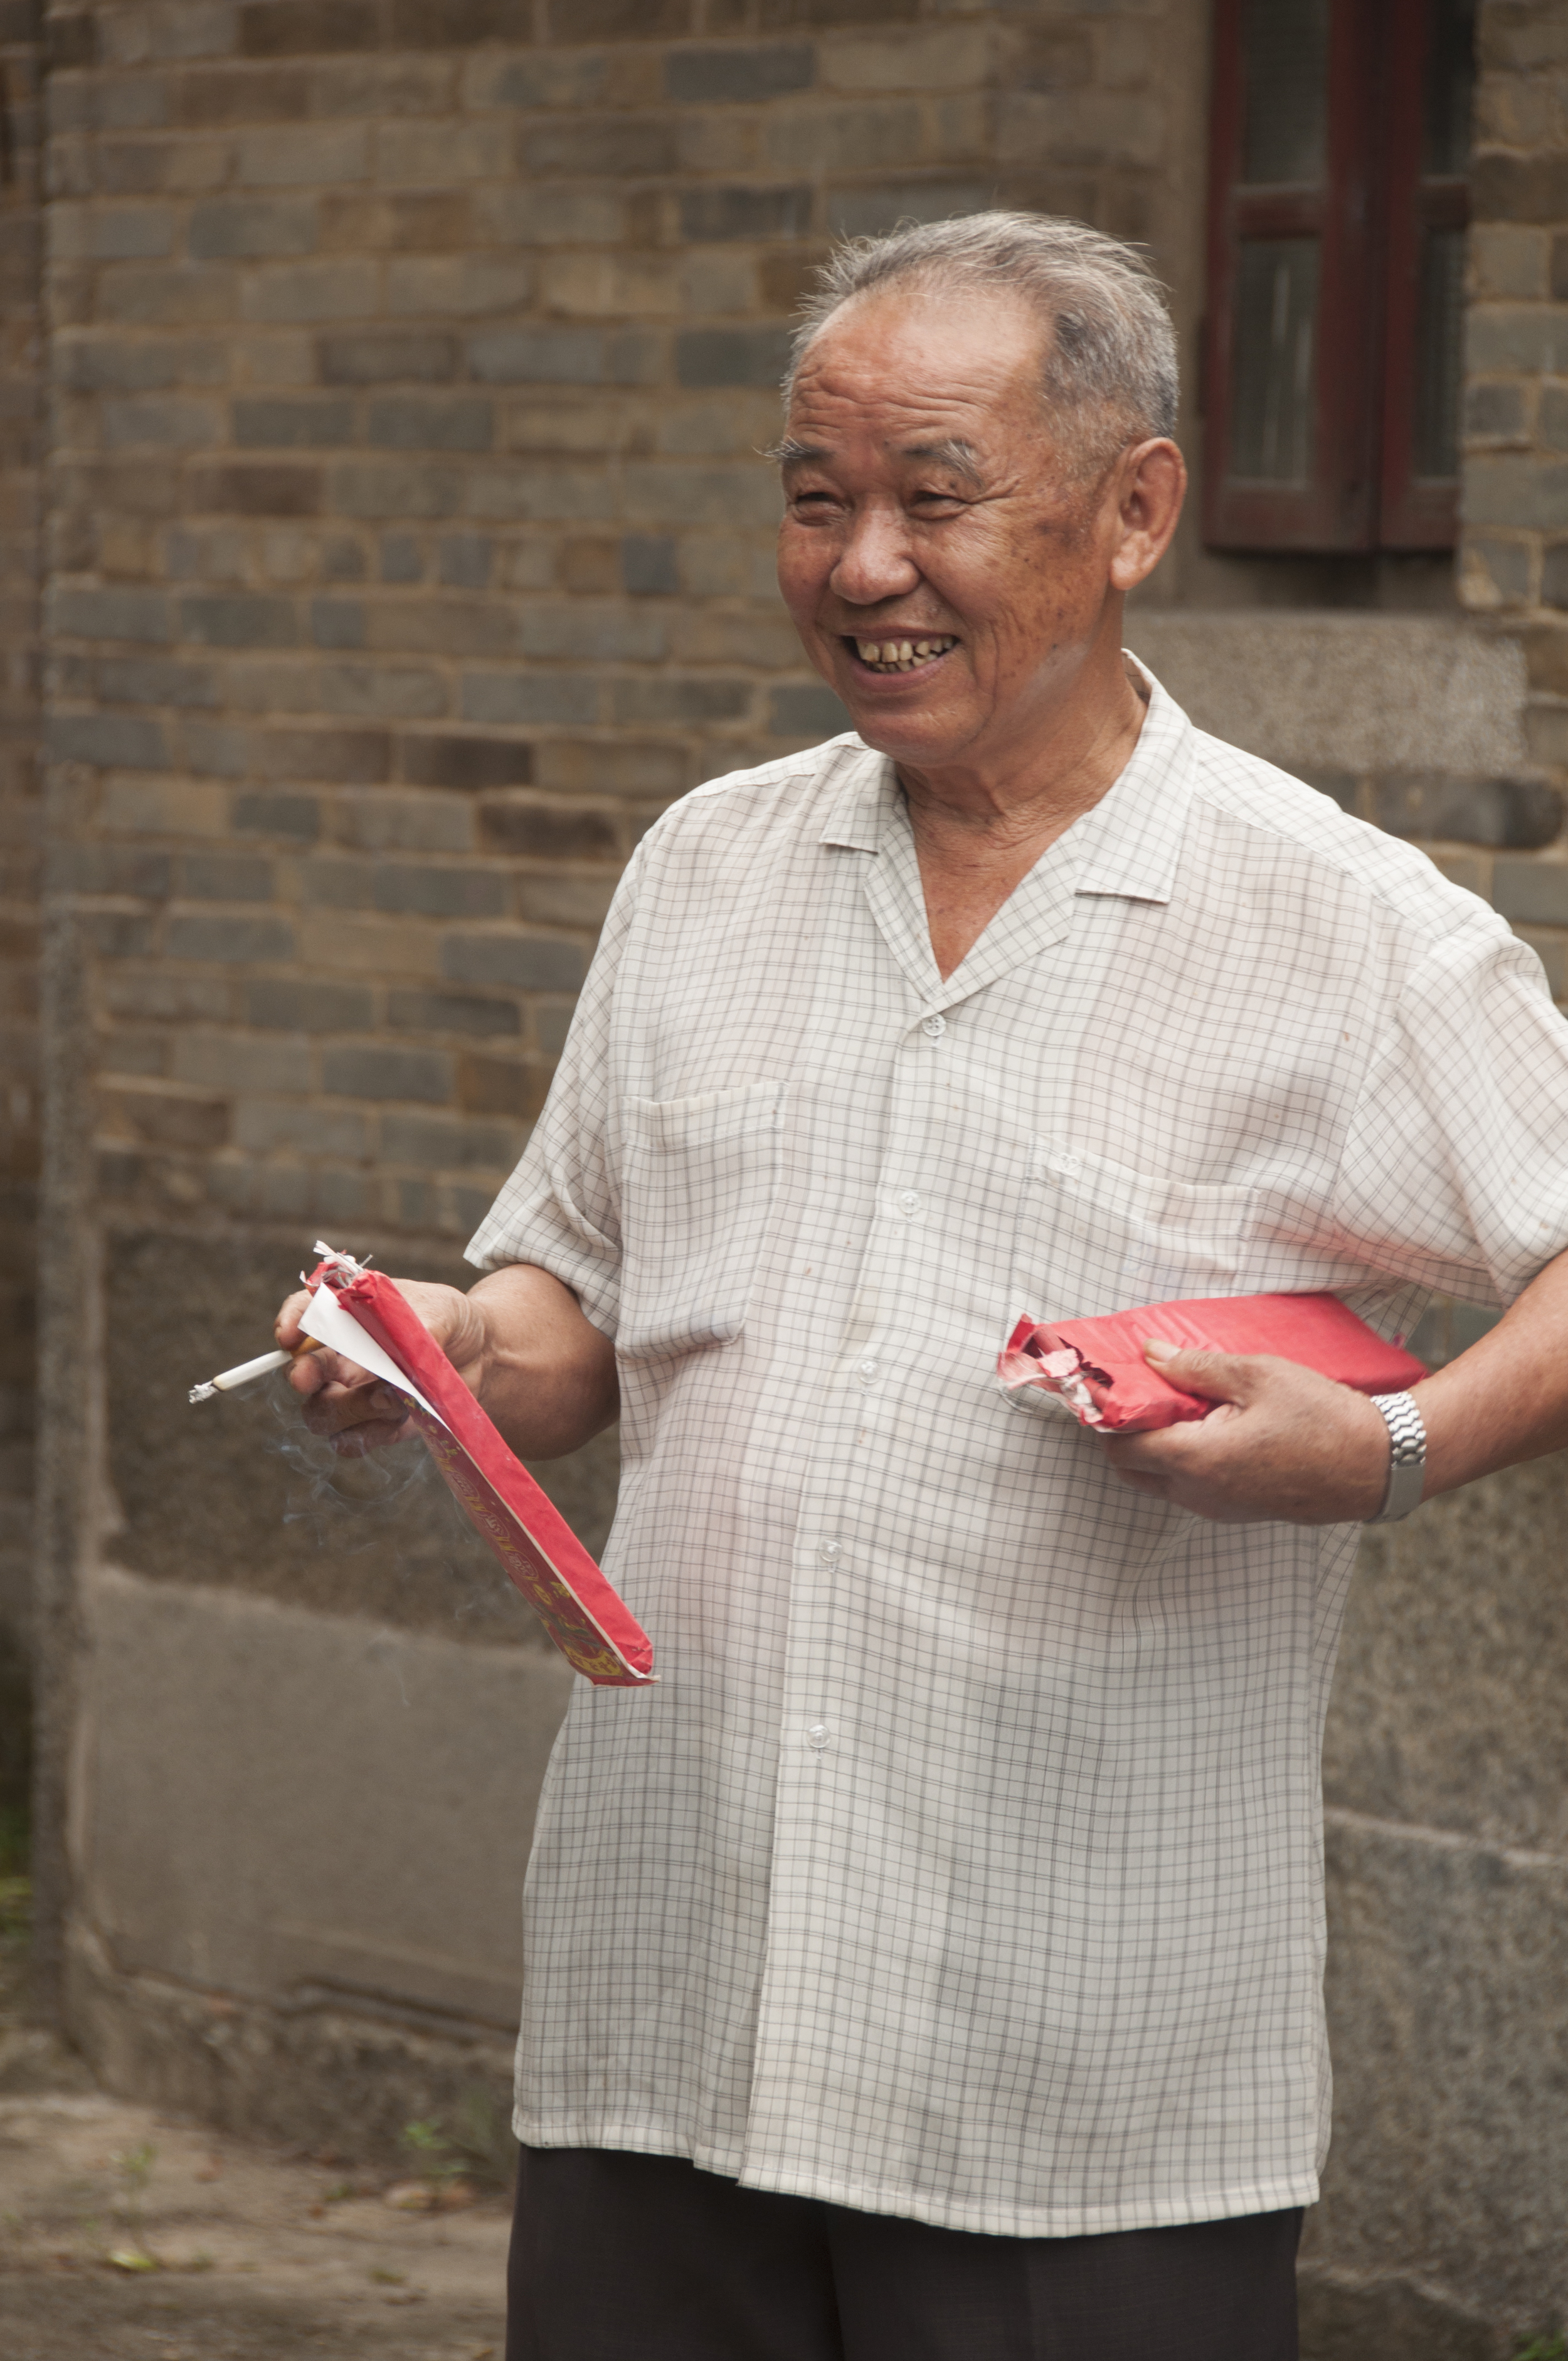 My great-uncle about to light firecrackers